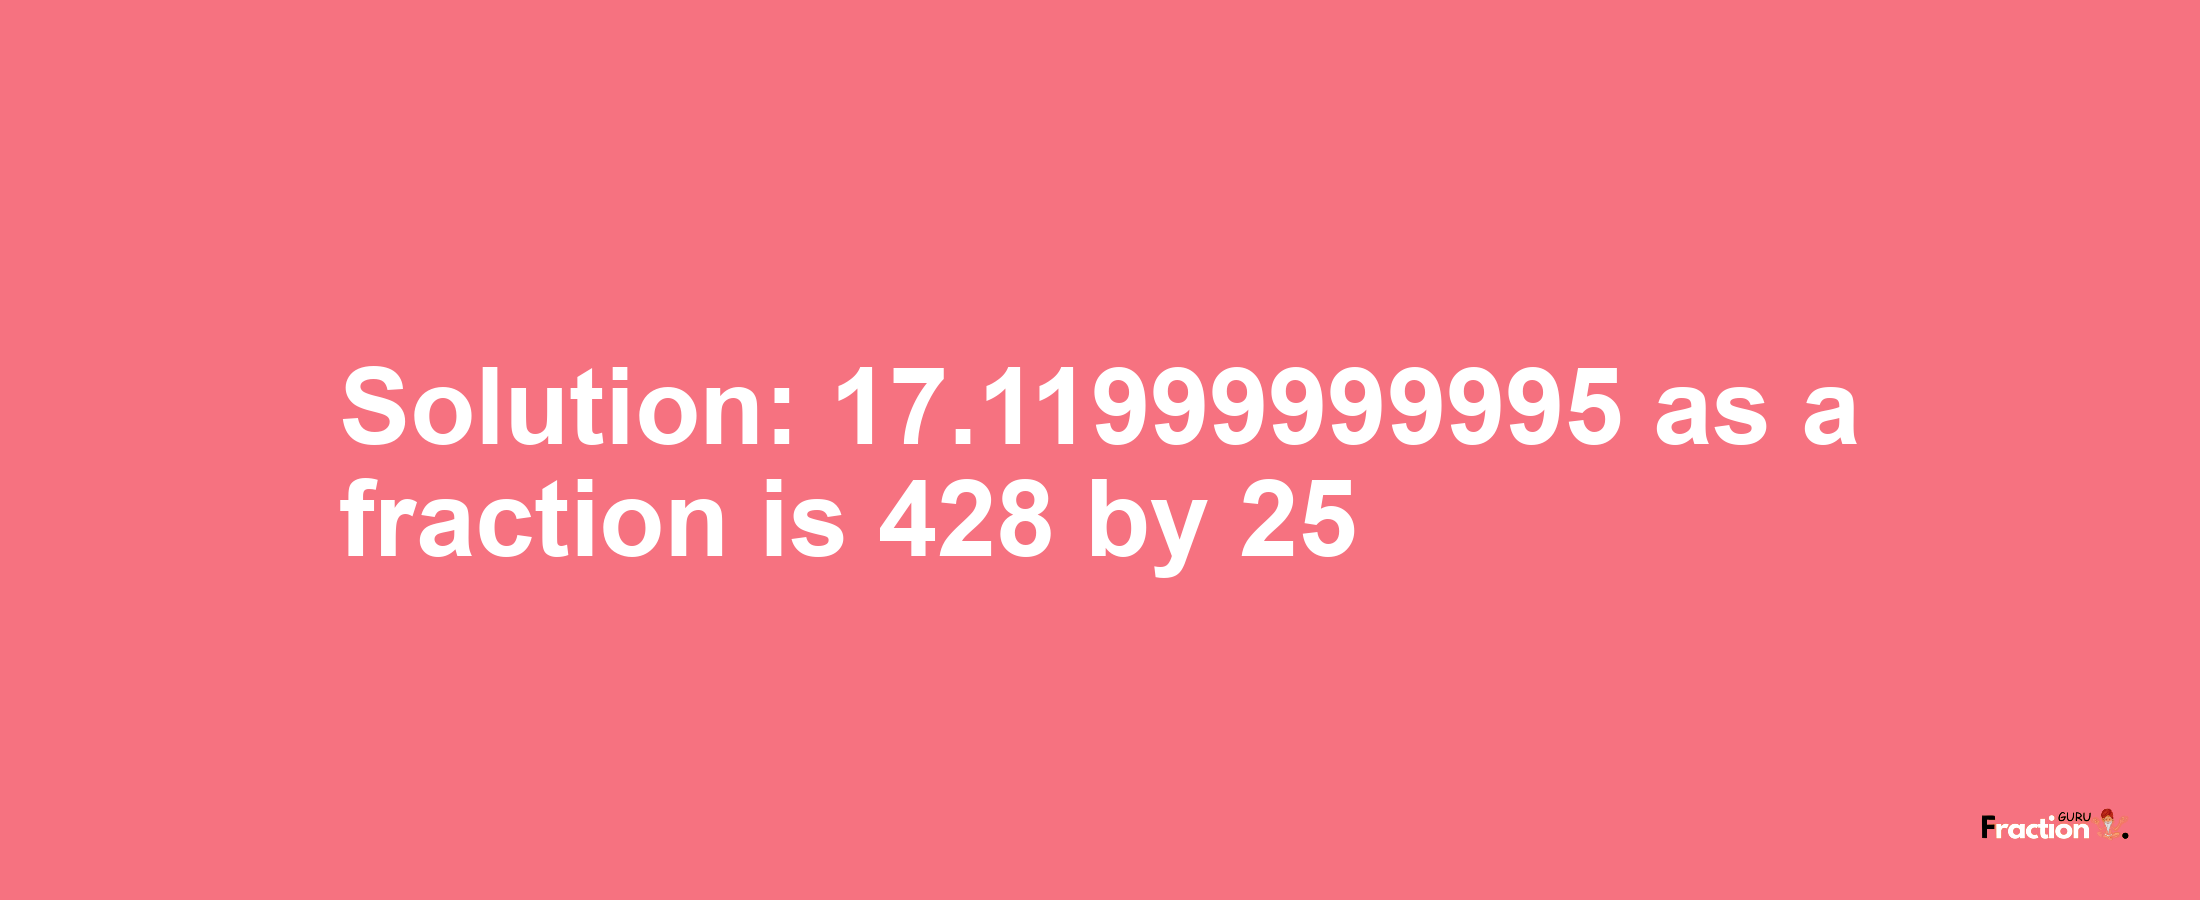 Solution:17.11999999995 as a fraction is 428/25